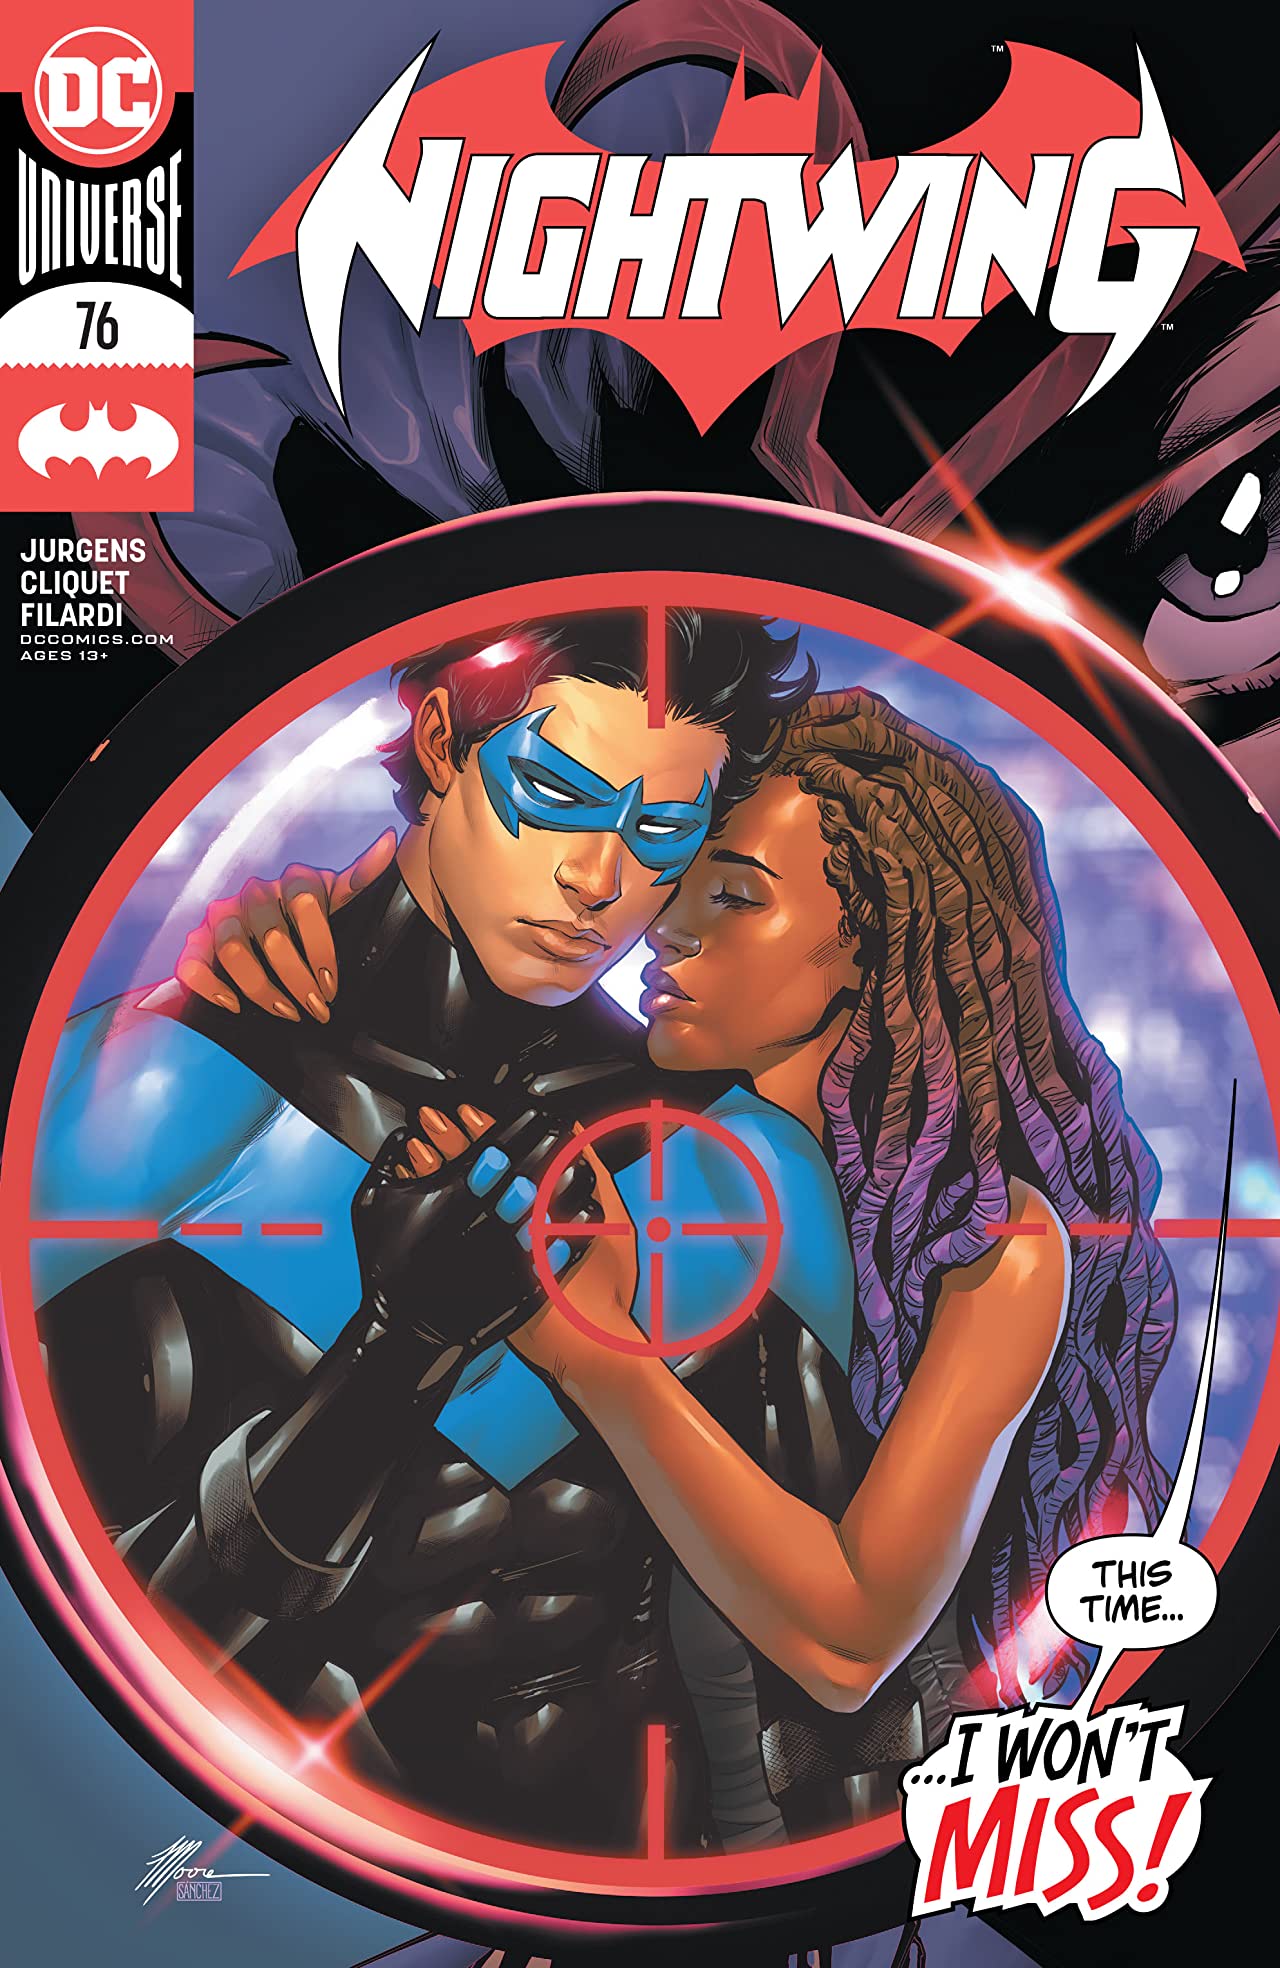 Review: Nightwing #76